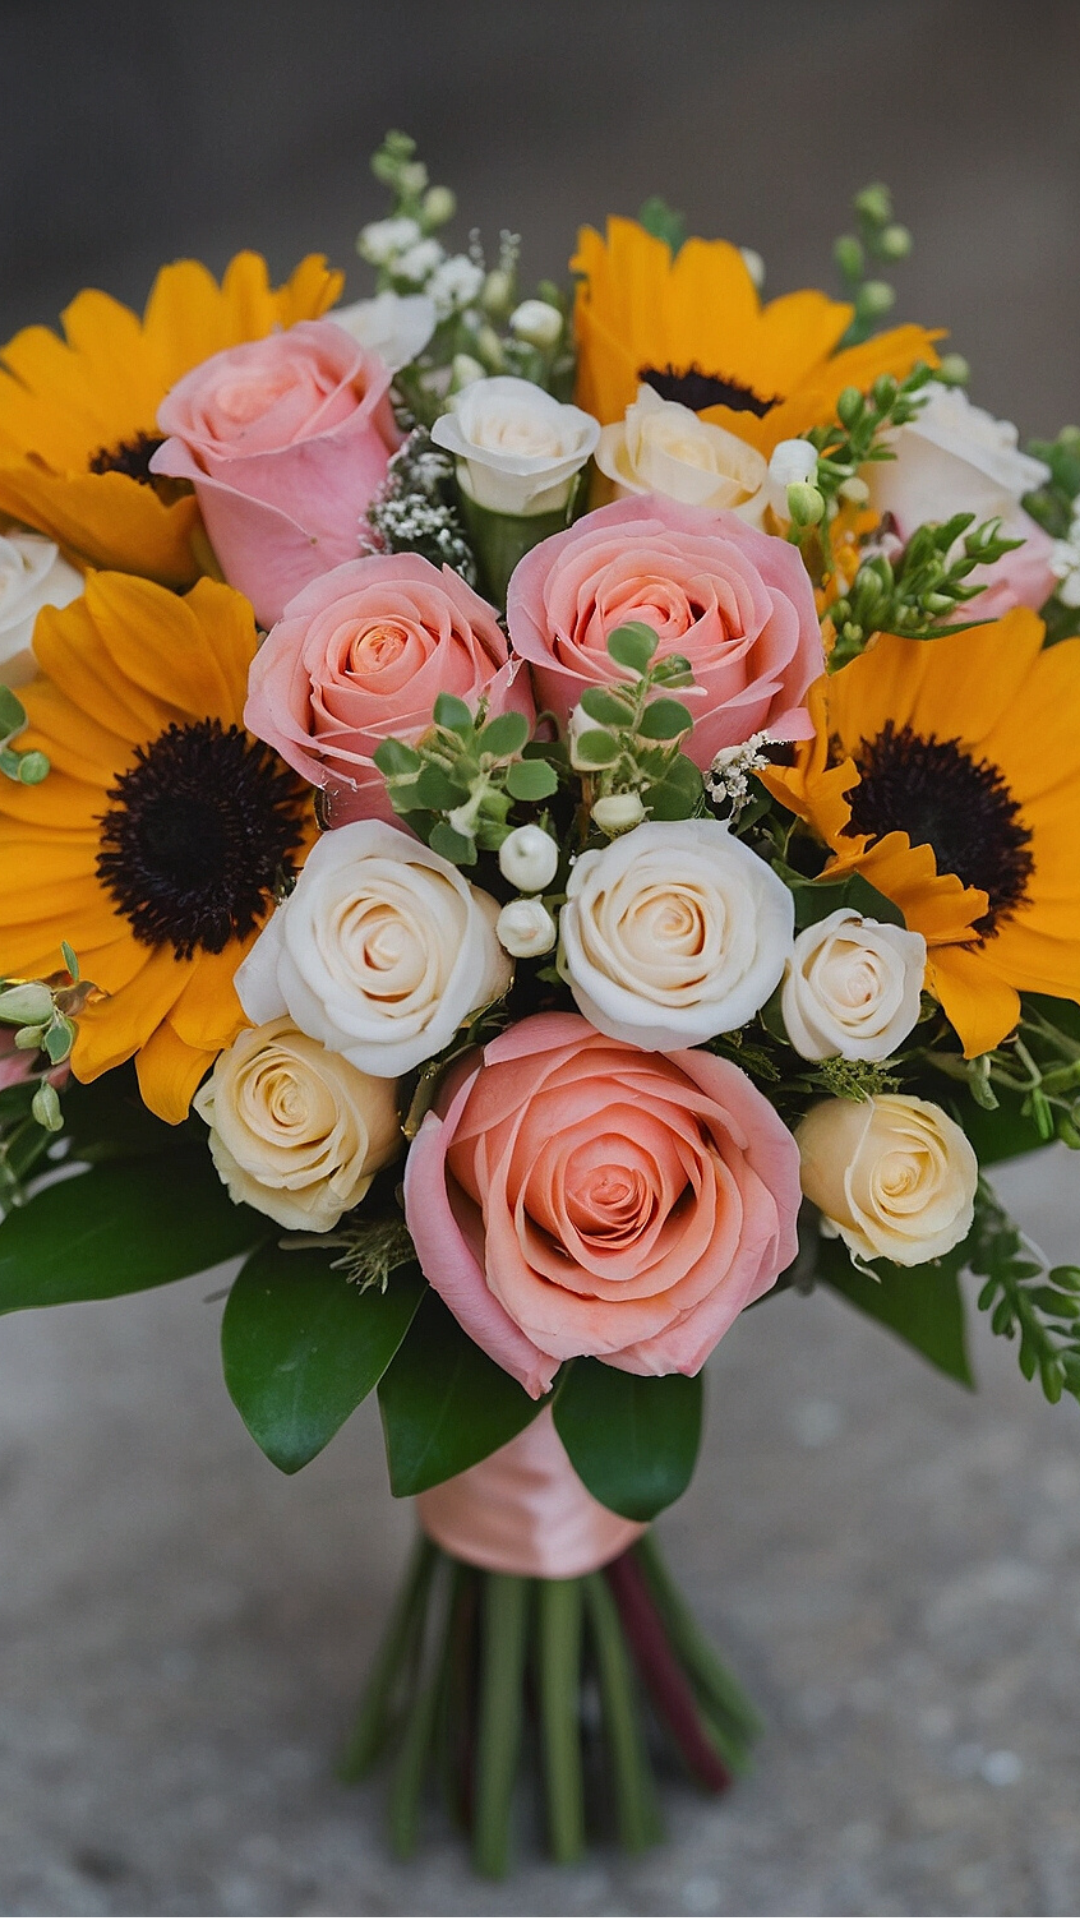 Daisy Delights: Prom Bouquet Ideas